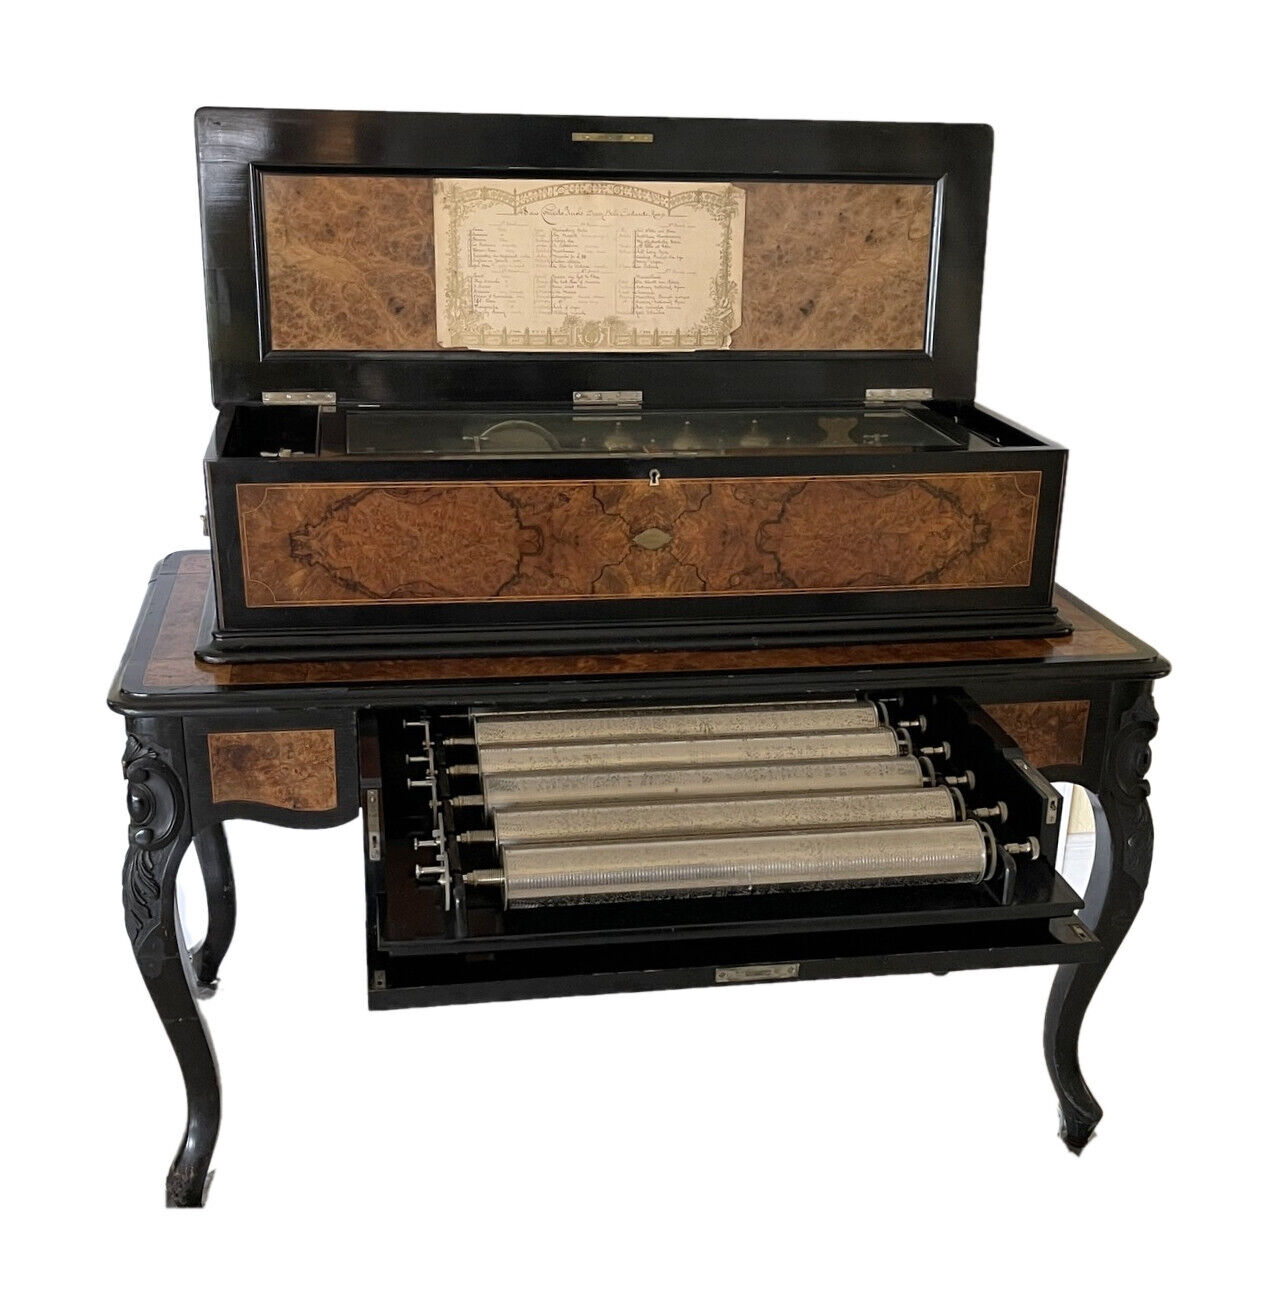 HUGE ANTIQUE ORCHESTRA MUSIC BOX -6 INTERCHANGEABLE CYLINDERS -WE SHIP WORLDWIDE